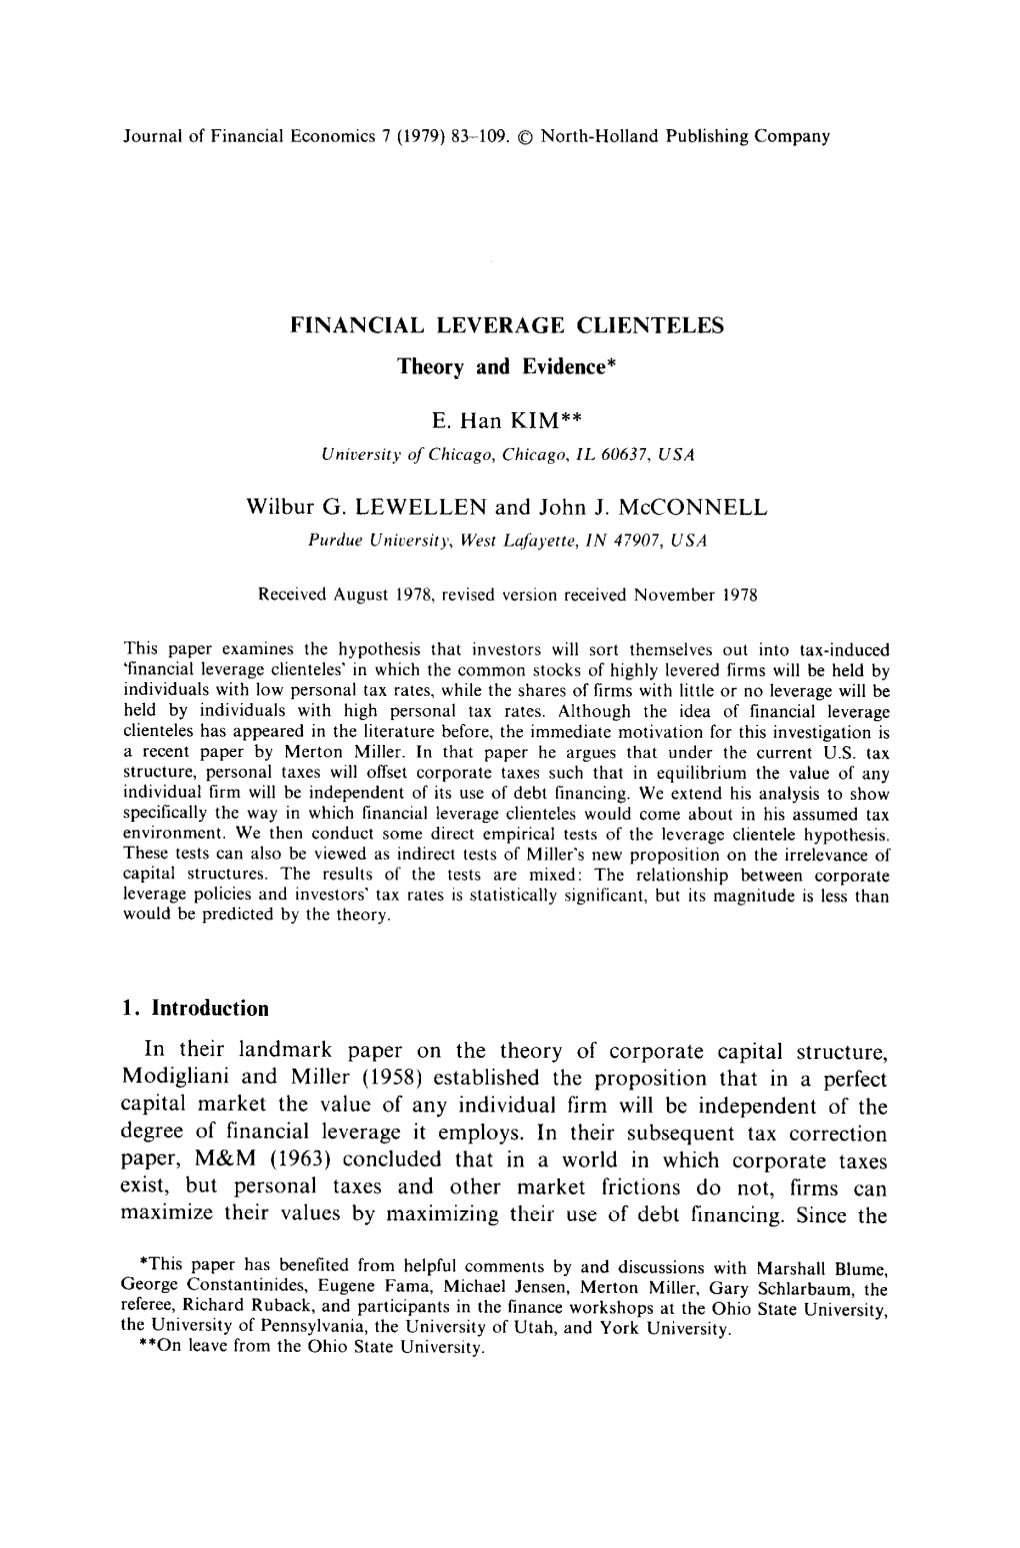 FINANCIAL LEVERAGE CLIENTELES Theory and Evidence* E. Han KIM